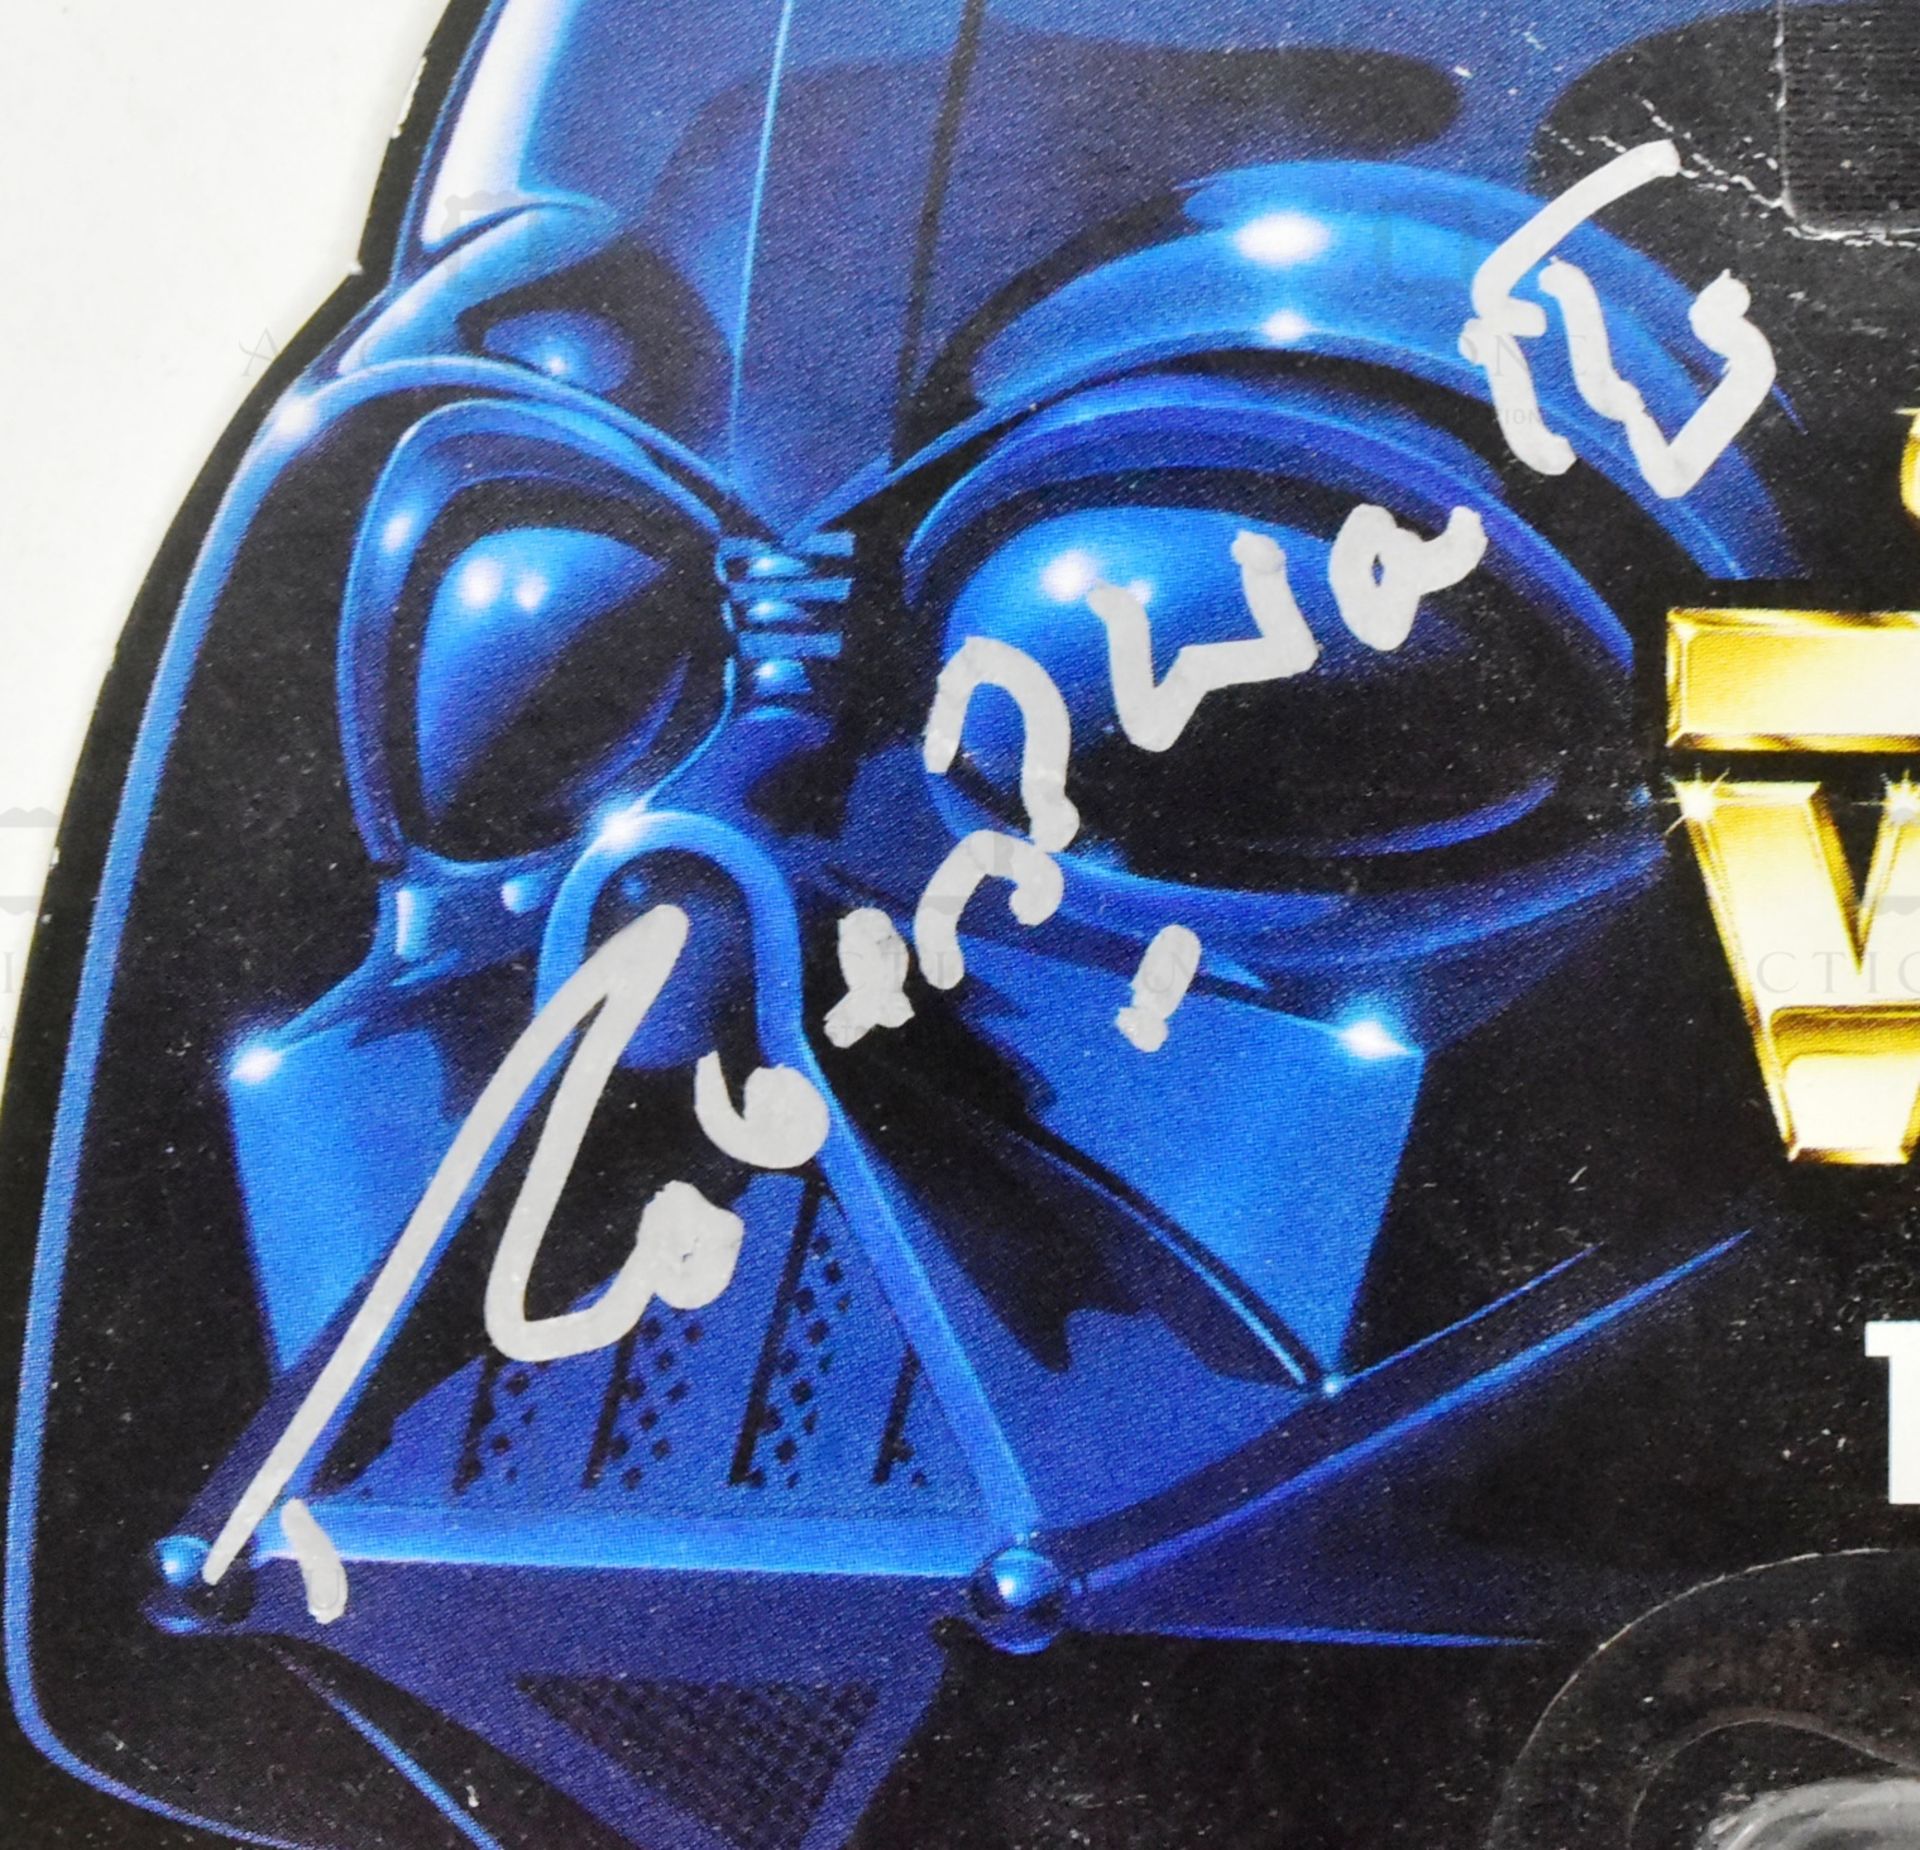 STAR WARS - ROBERT WATTS (PRODUCER) - AUTOGRAPHED ACTION FIGURE - Image 3 of 5